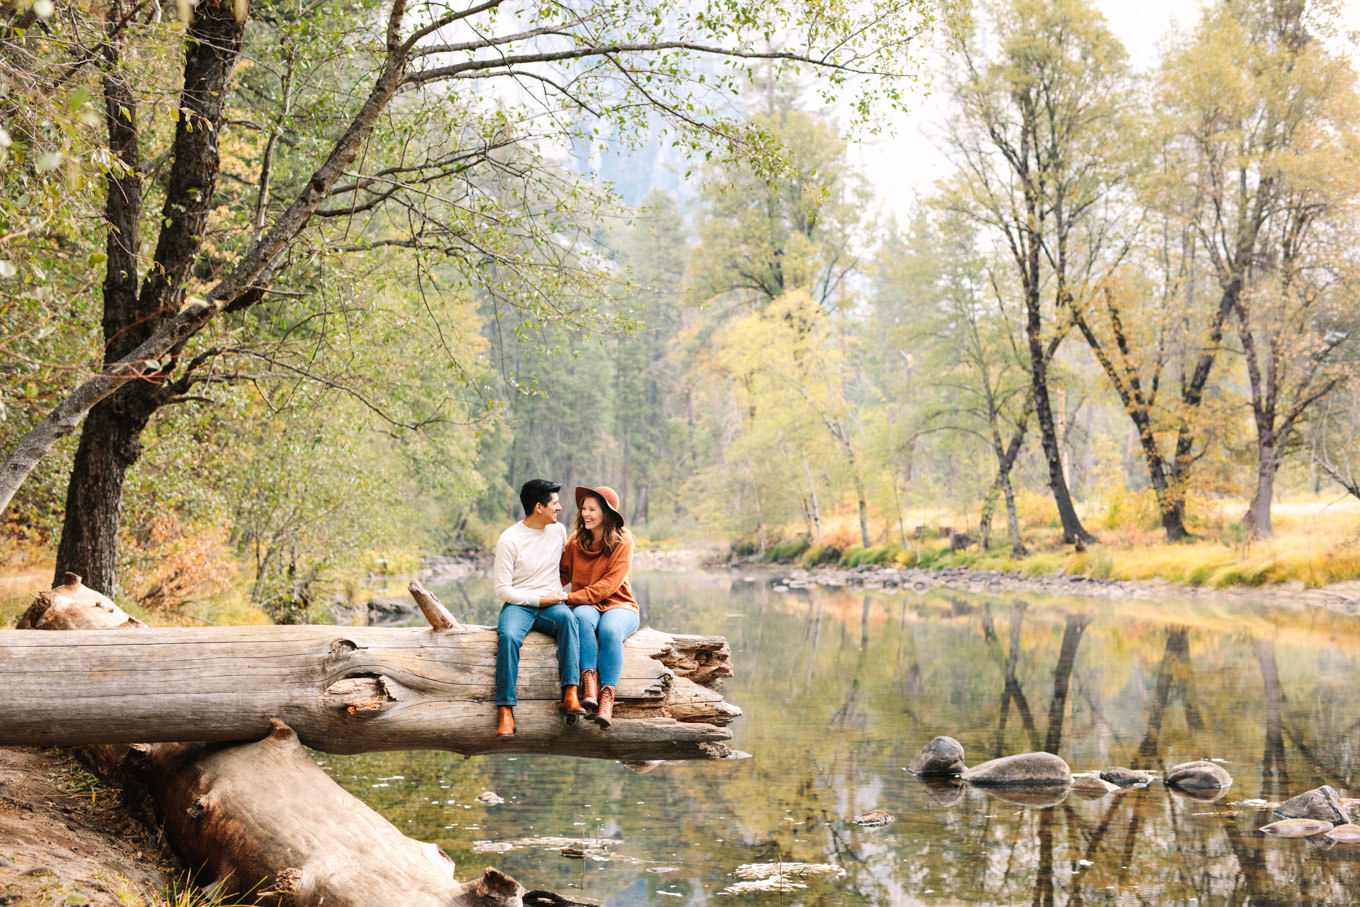 Autumn engagement session in Yosemite National Park Los Angeles Chinatown engagement session | Engagement, elopement, and wedding photography roundup of Mary Costa’s favorite images from 2020 | Colorful and elevated photography for fun-loving couples in Southern California | #2020wedding #elopement #weddingphoto #weddingphotography #microwedding   Source: Mary Costa Photography | Los Angeles